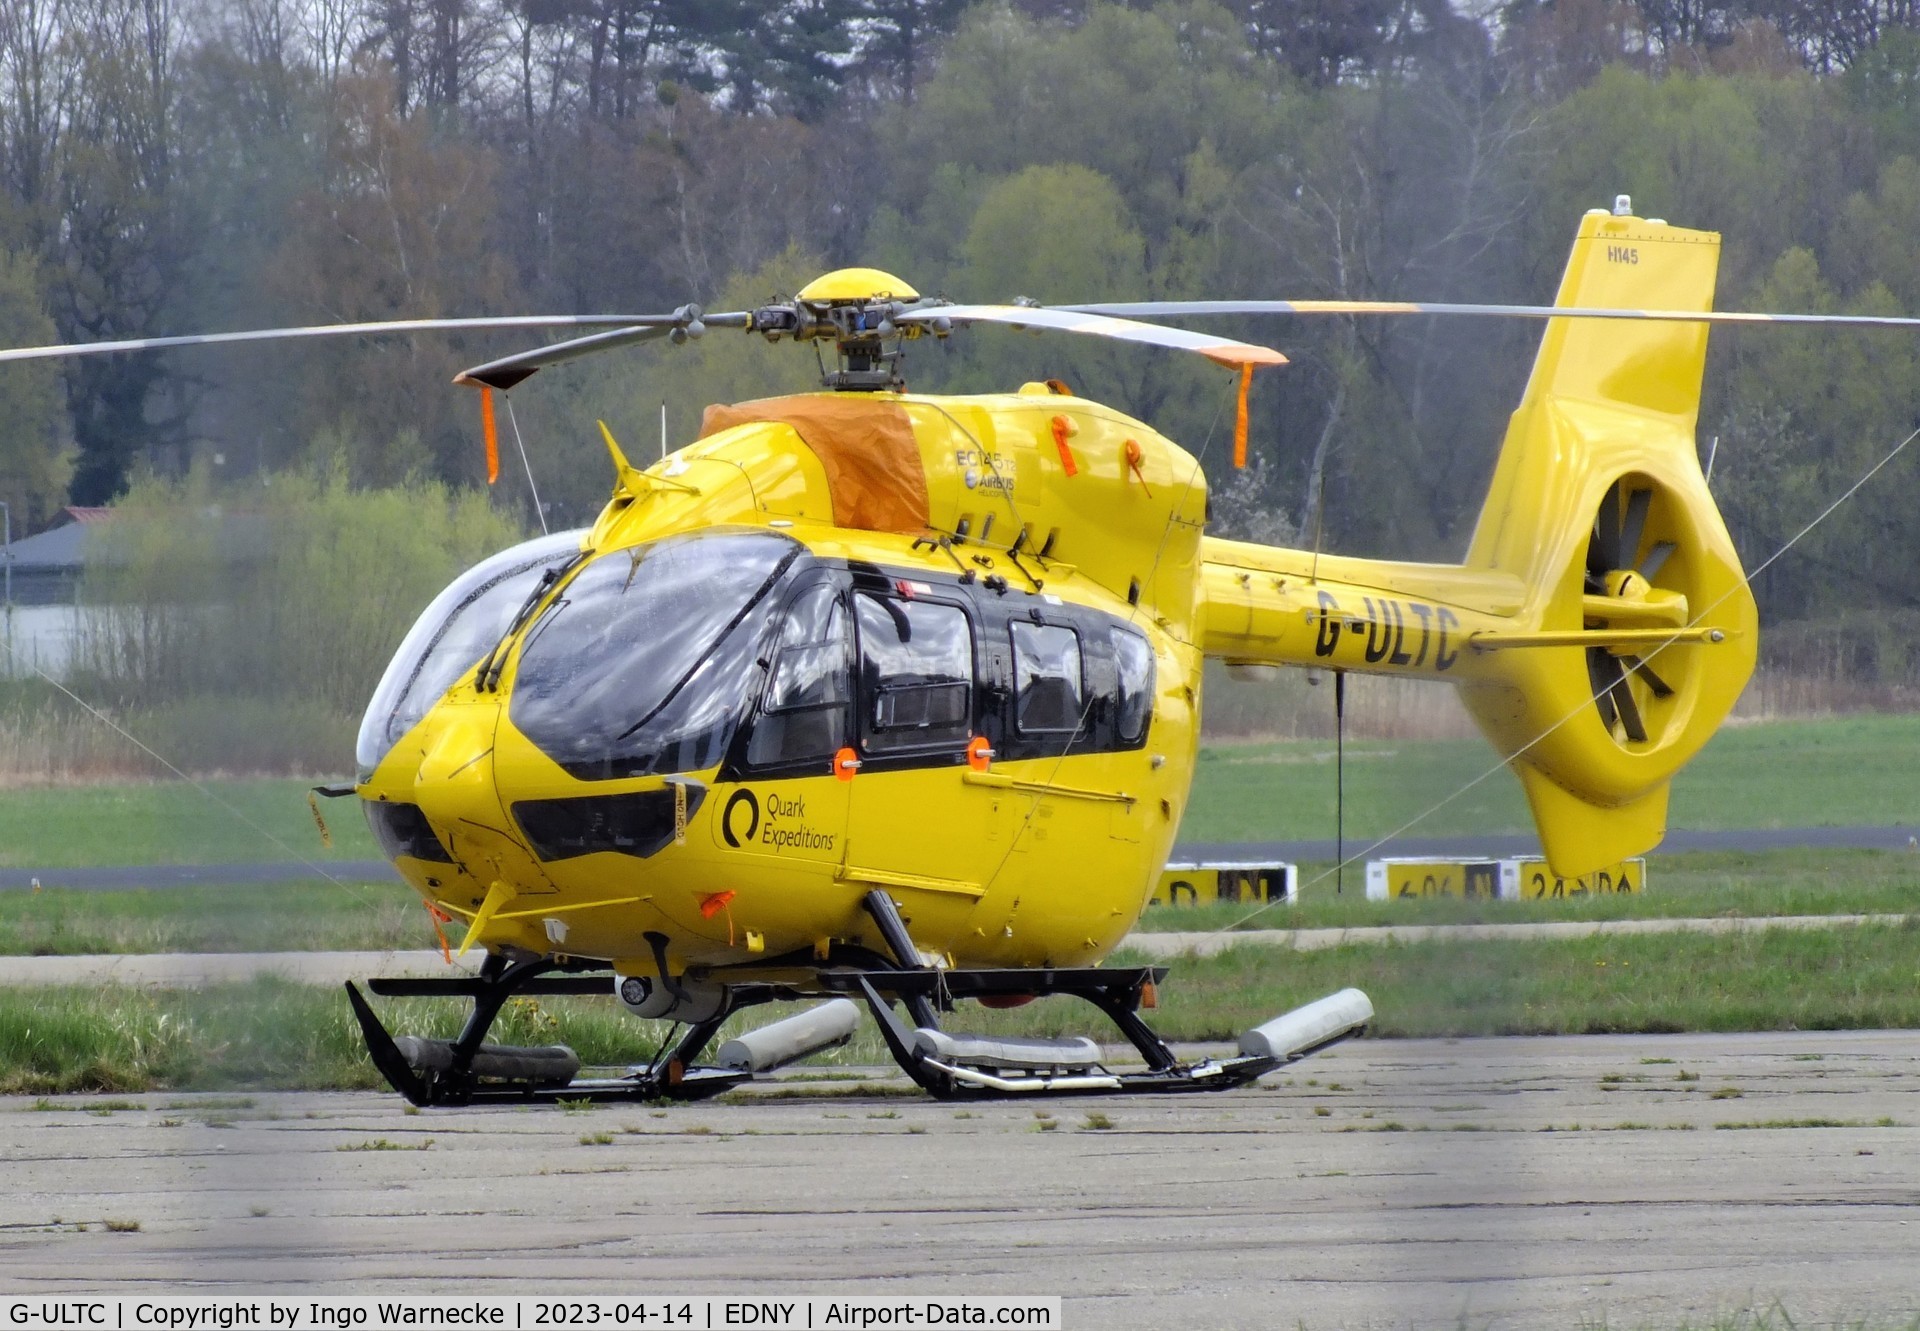 G-ULTC, 2016 Airbus Helicopters EC-145 (BK-117D-2) C/N 20090, Airbus Helicopters EC145 of Quark expeditions at Friedrichshafen-Bodensee airport